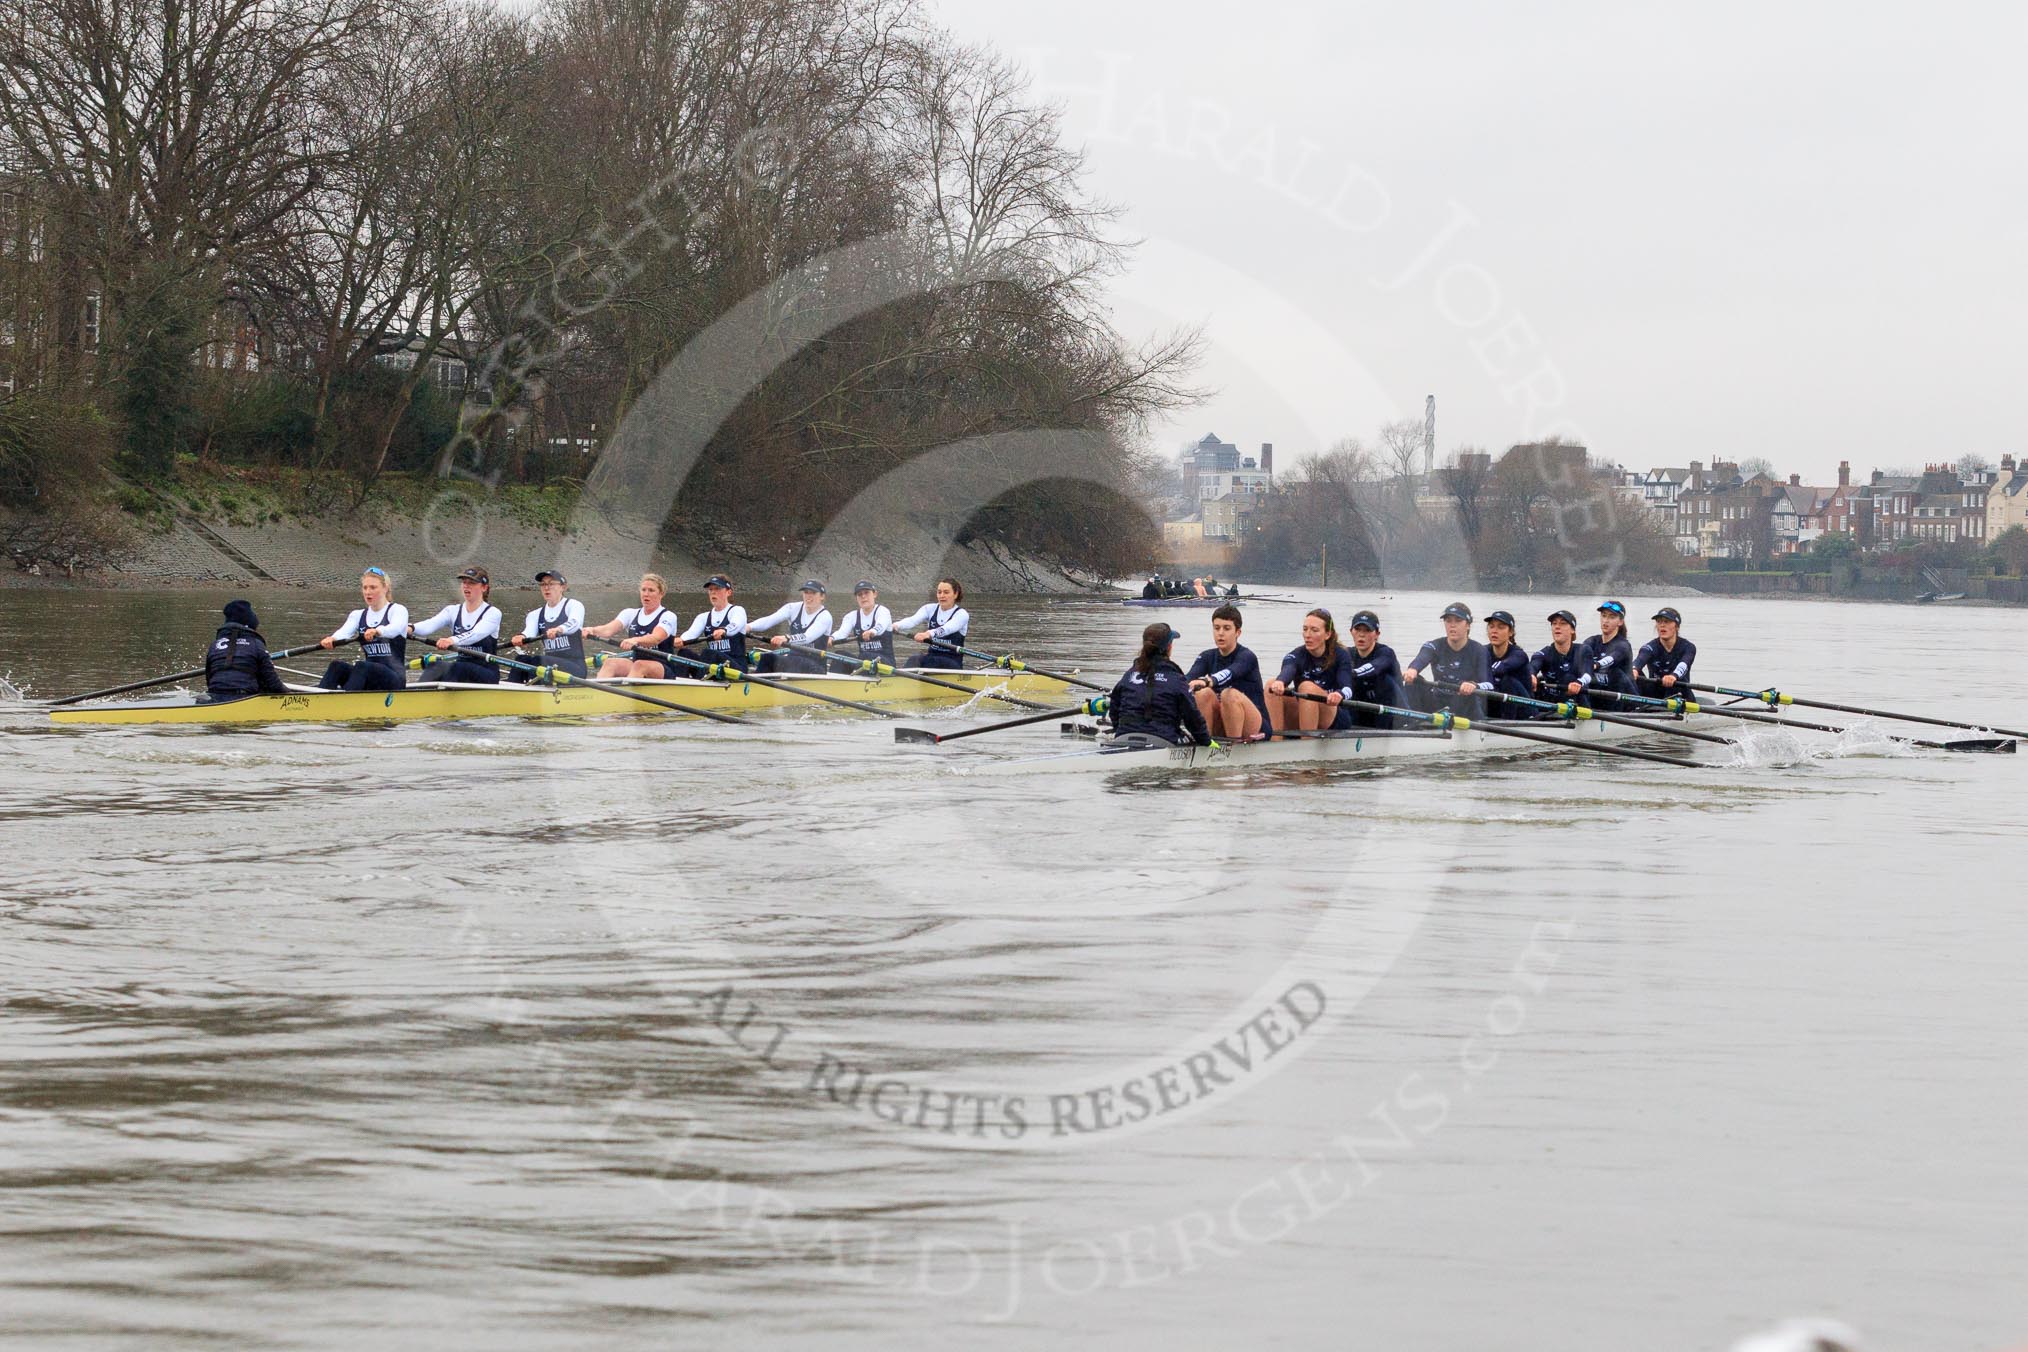 The Boat Race season 2018 - Women's Boat Race Trial Eights (OUWBC, Oxford): "Great Typhoon" and "Coursing River" close together behind Hammersmith Bridge - close enough for the oars to come together.
River Thames between Putney Bridge and Mortlake,
London SW15,

United Kingdom,
on 21 January 2018 at 14:36, image #112